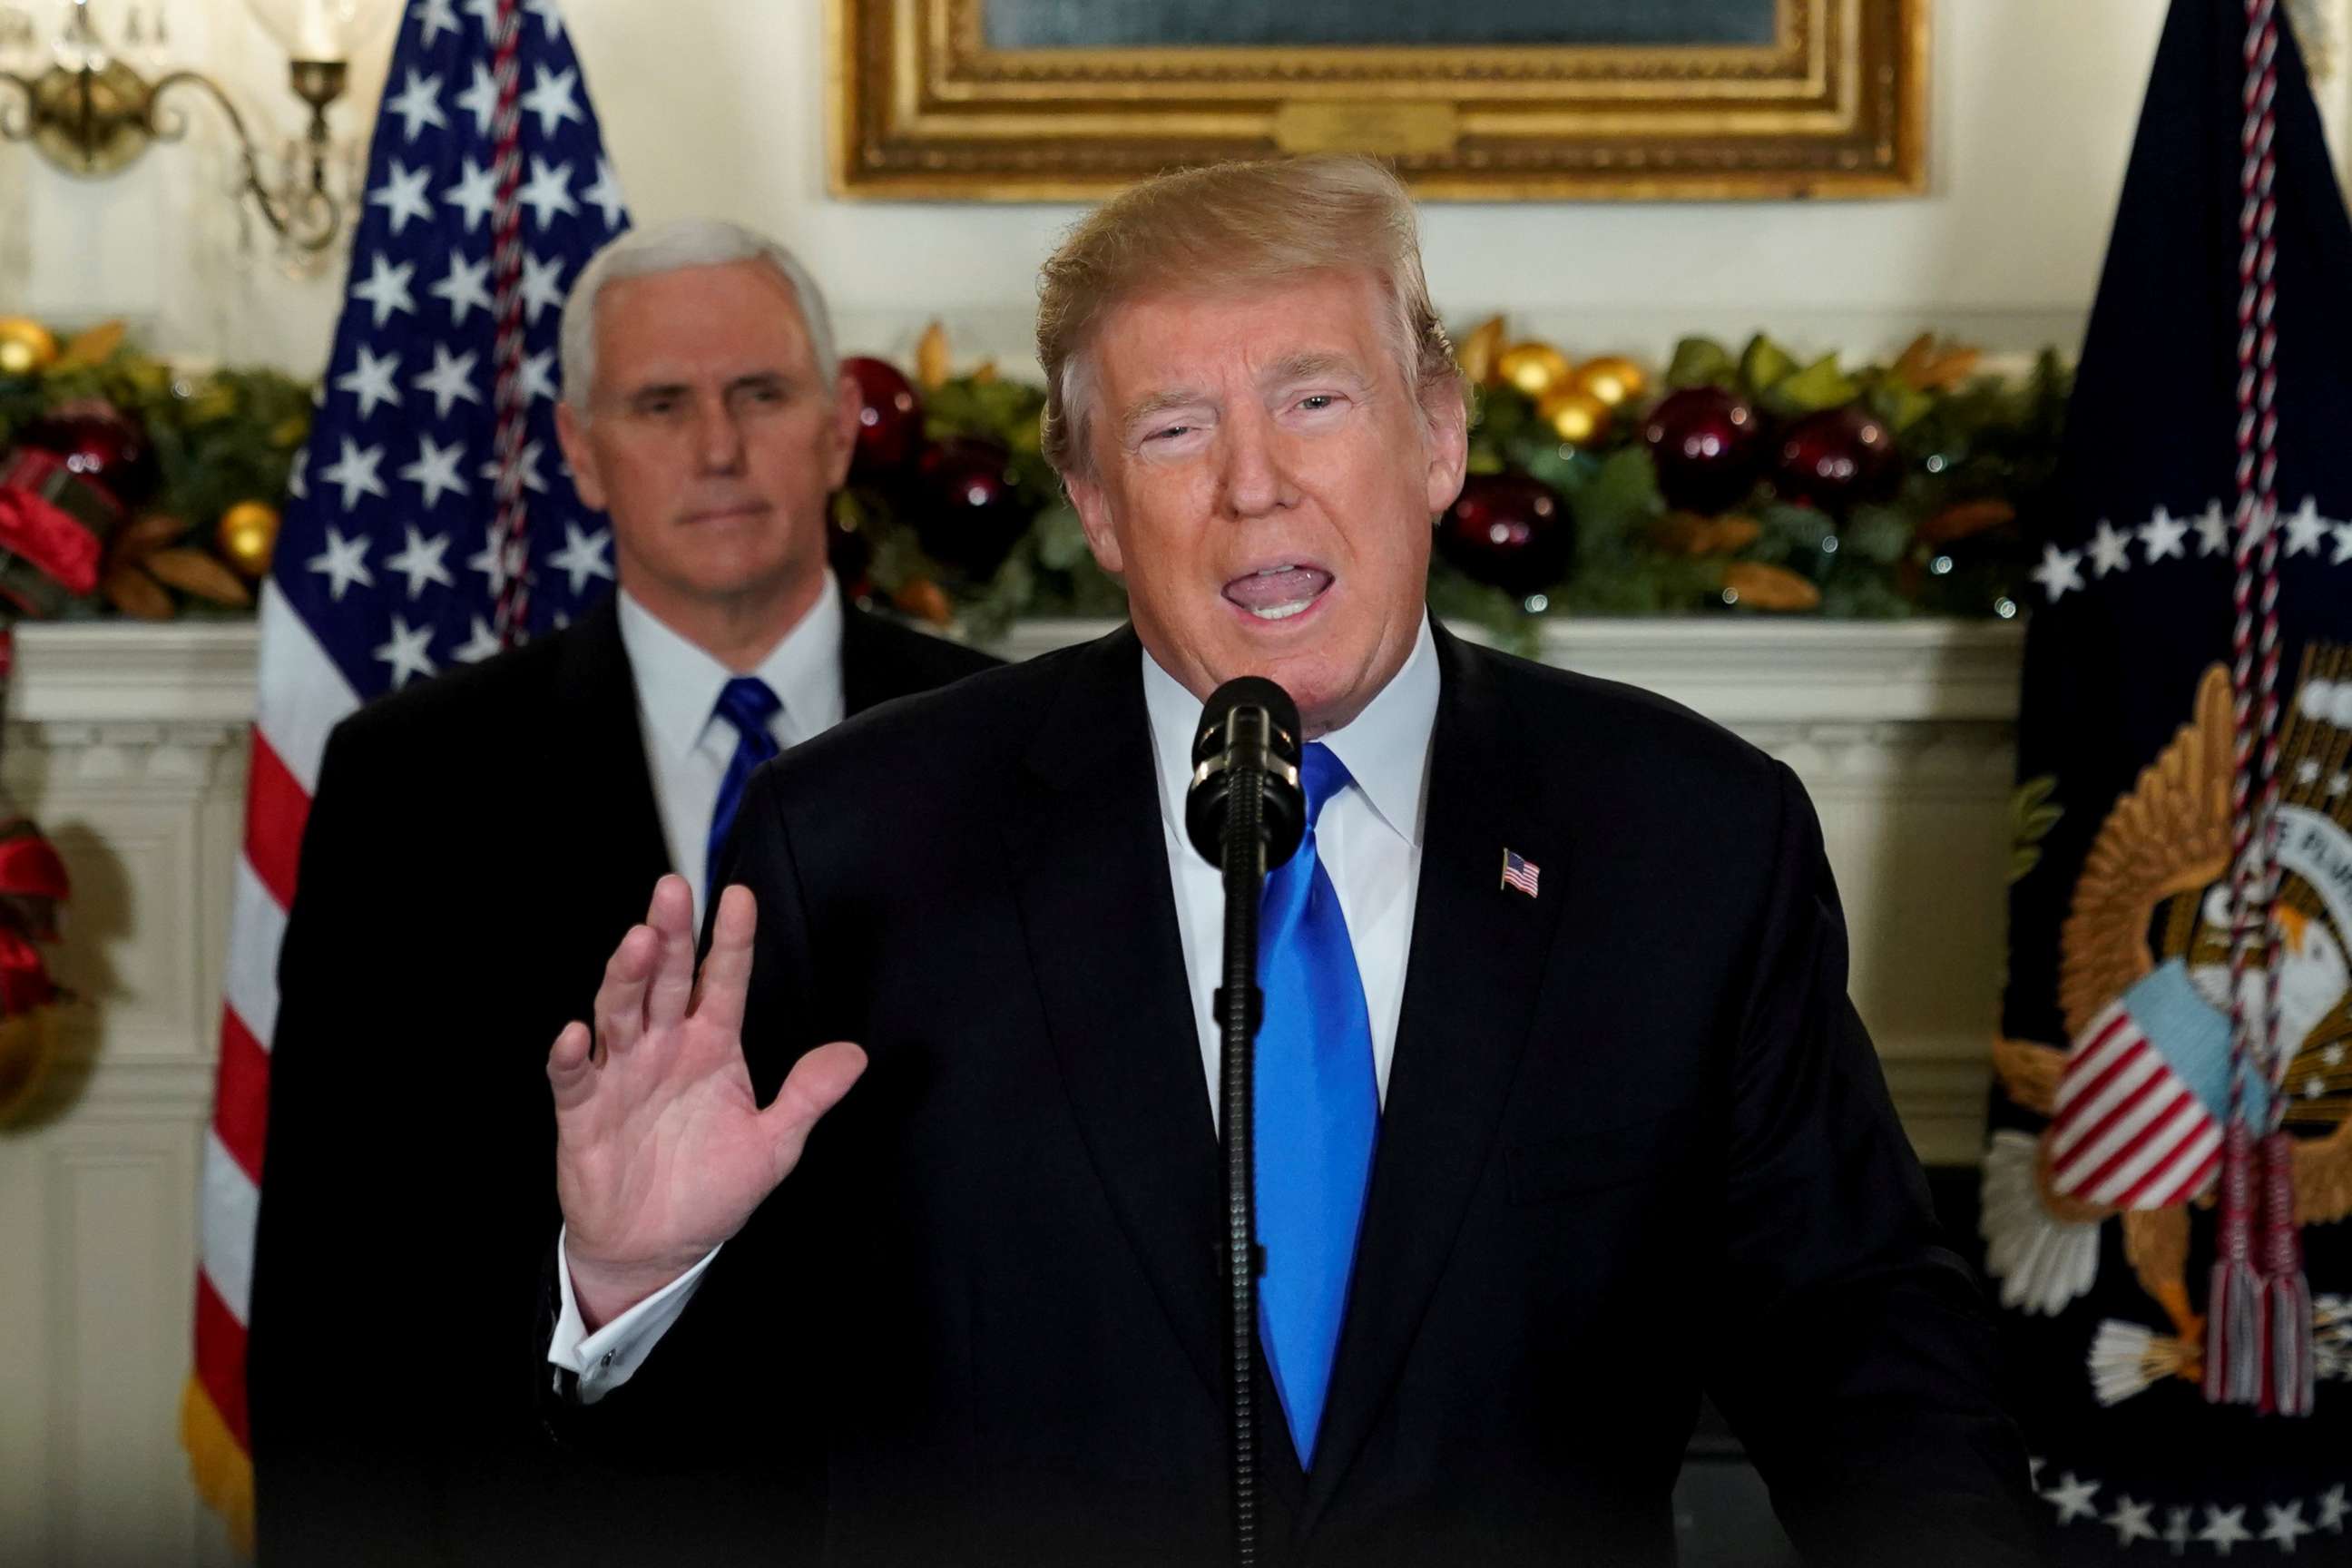 PHOTO: President Donald Trump, flanked by Vice President Mike Pence, delivers remarks recognizing Jerusalem as the capital of Israel at the White House in Washington, D.C., Dec. 6, 2017.  